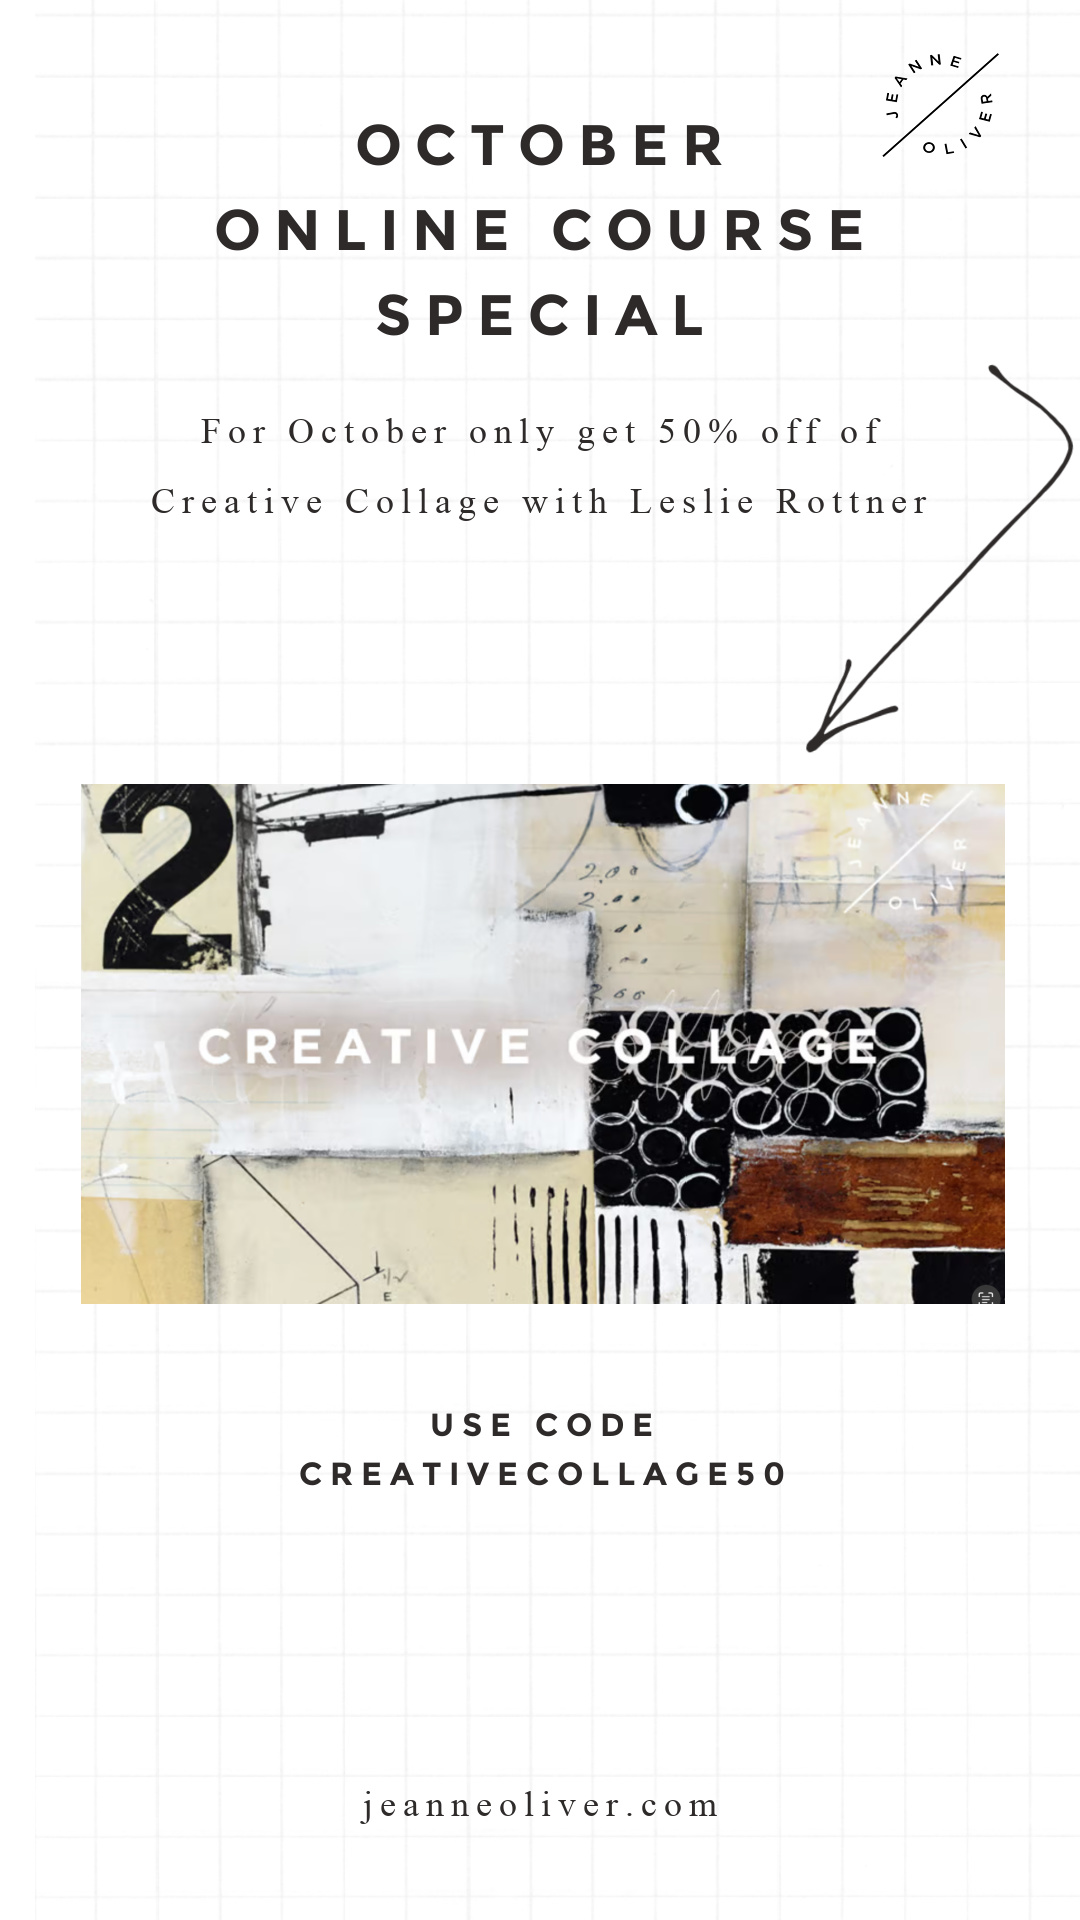 October Online Course Special | Creative Collage with Leslie Rottner 50% Off